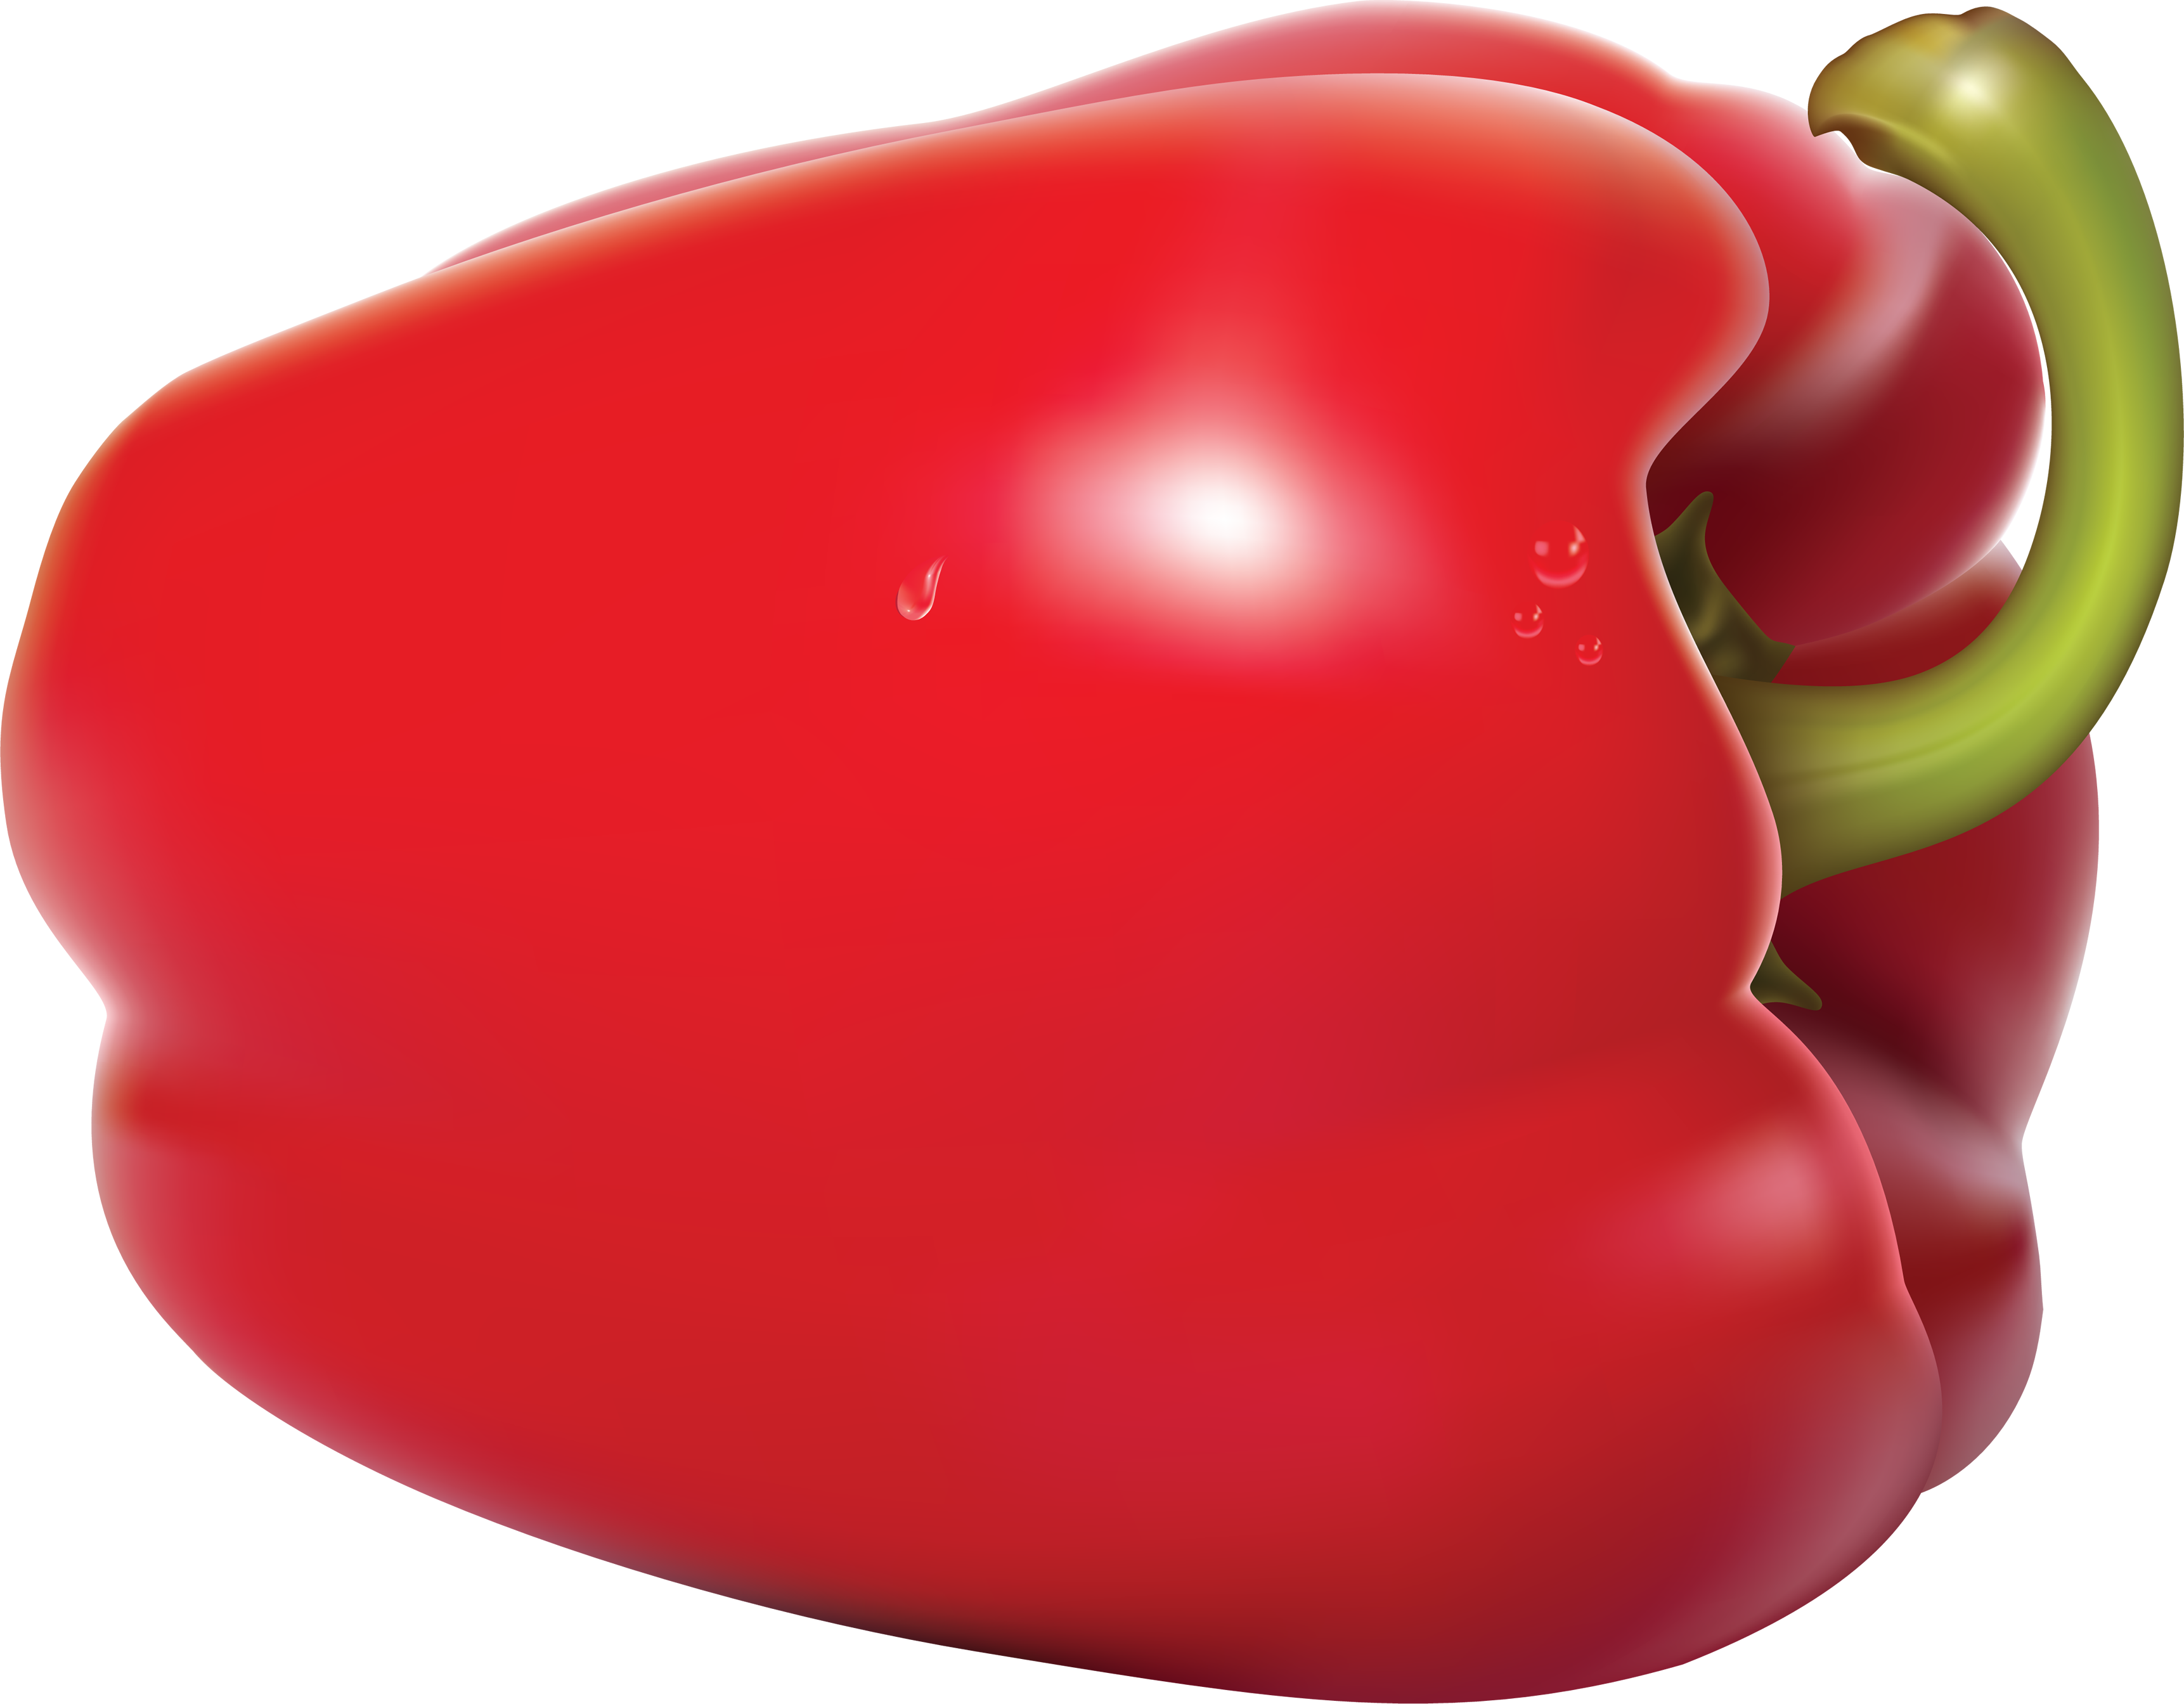 Red Pepper Png Image - Pepper, Transparent background PNG HD thumbnail